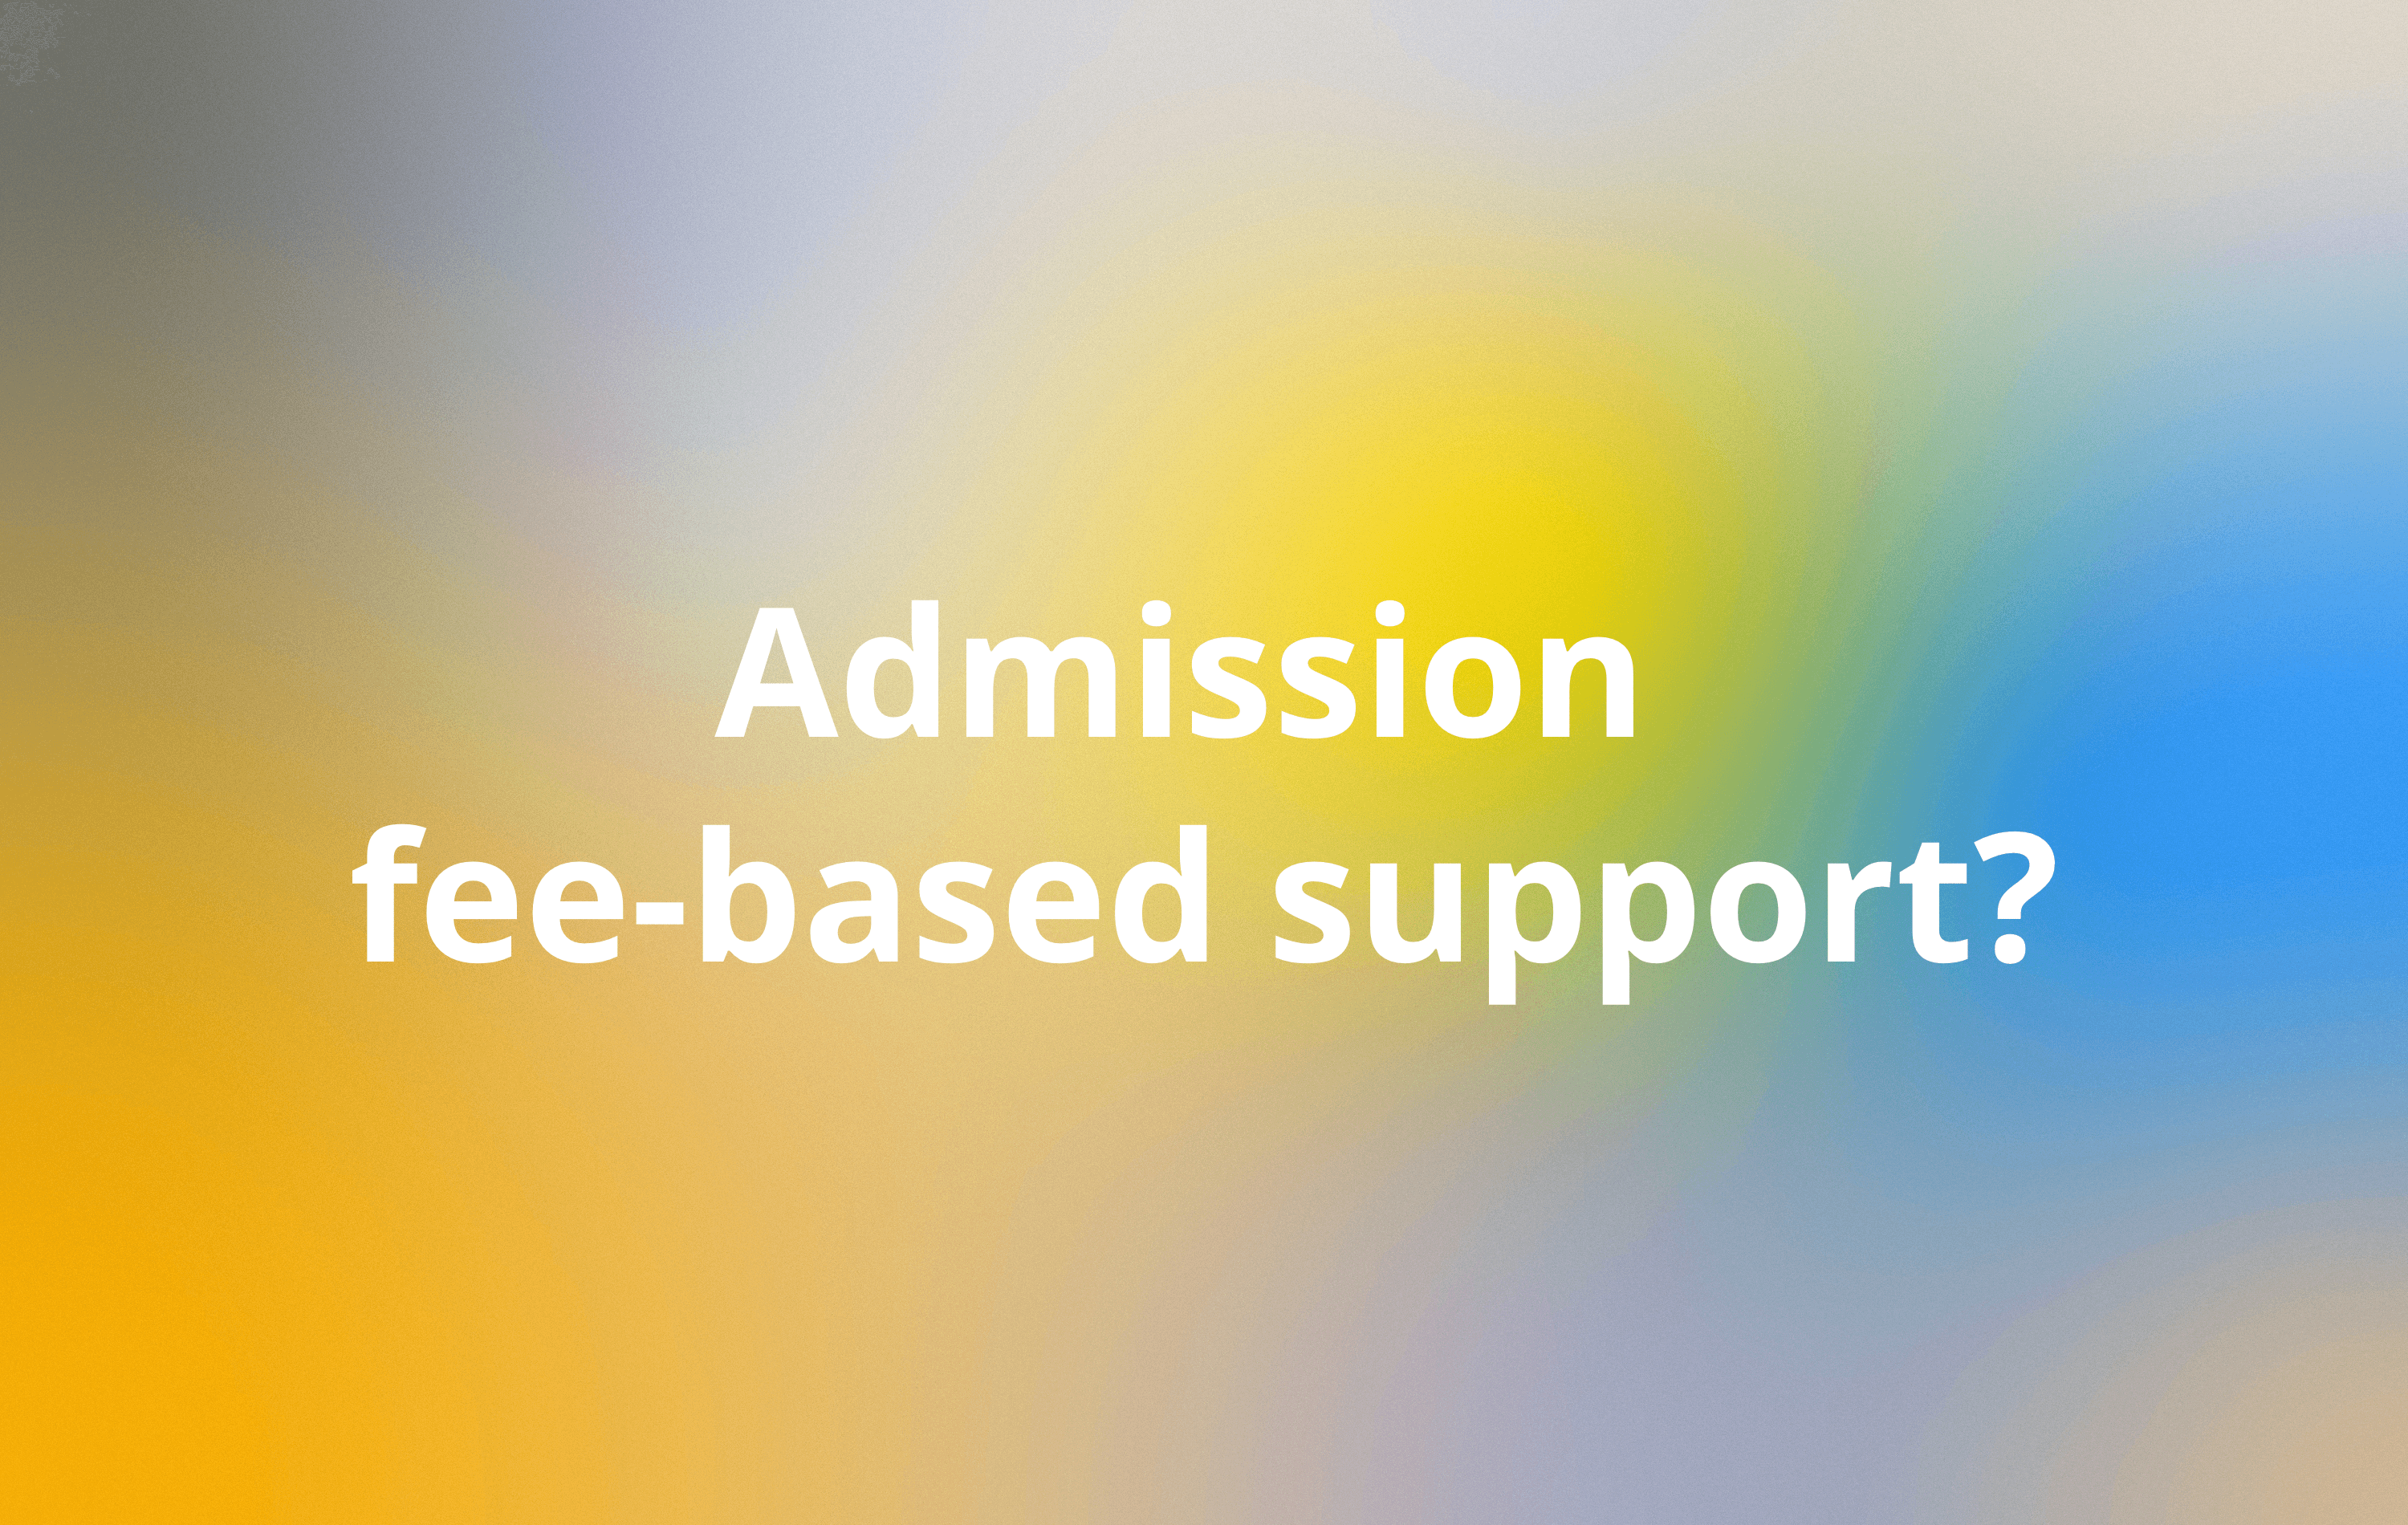 Admission fee-based support?